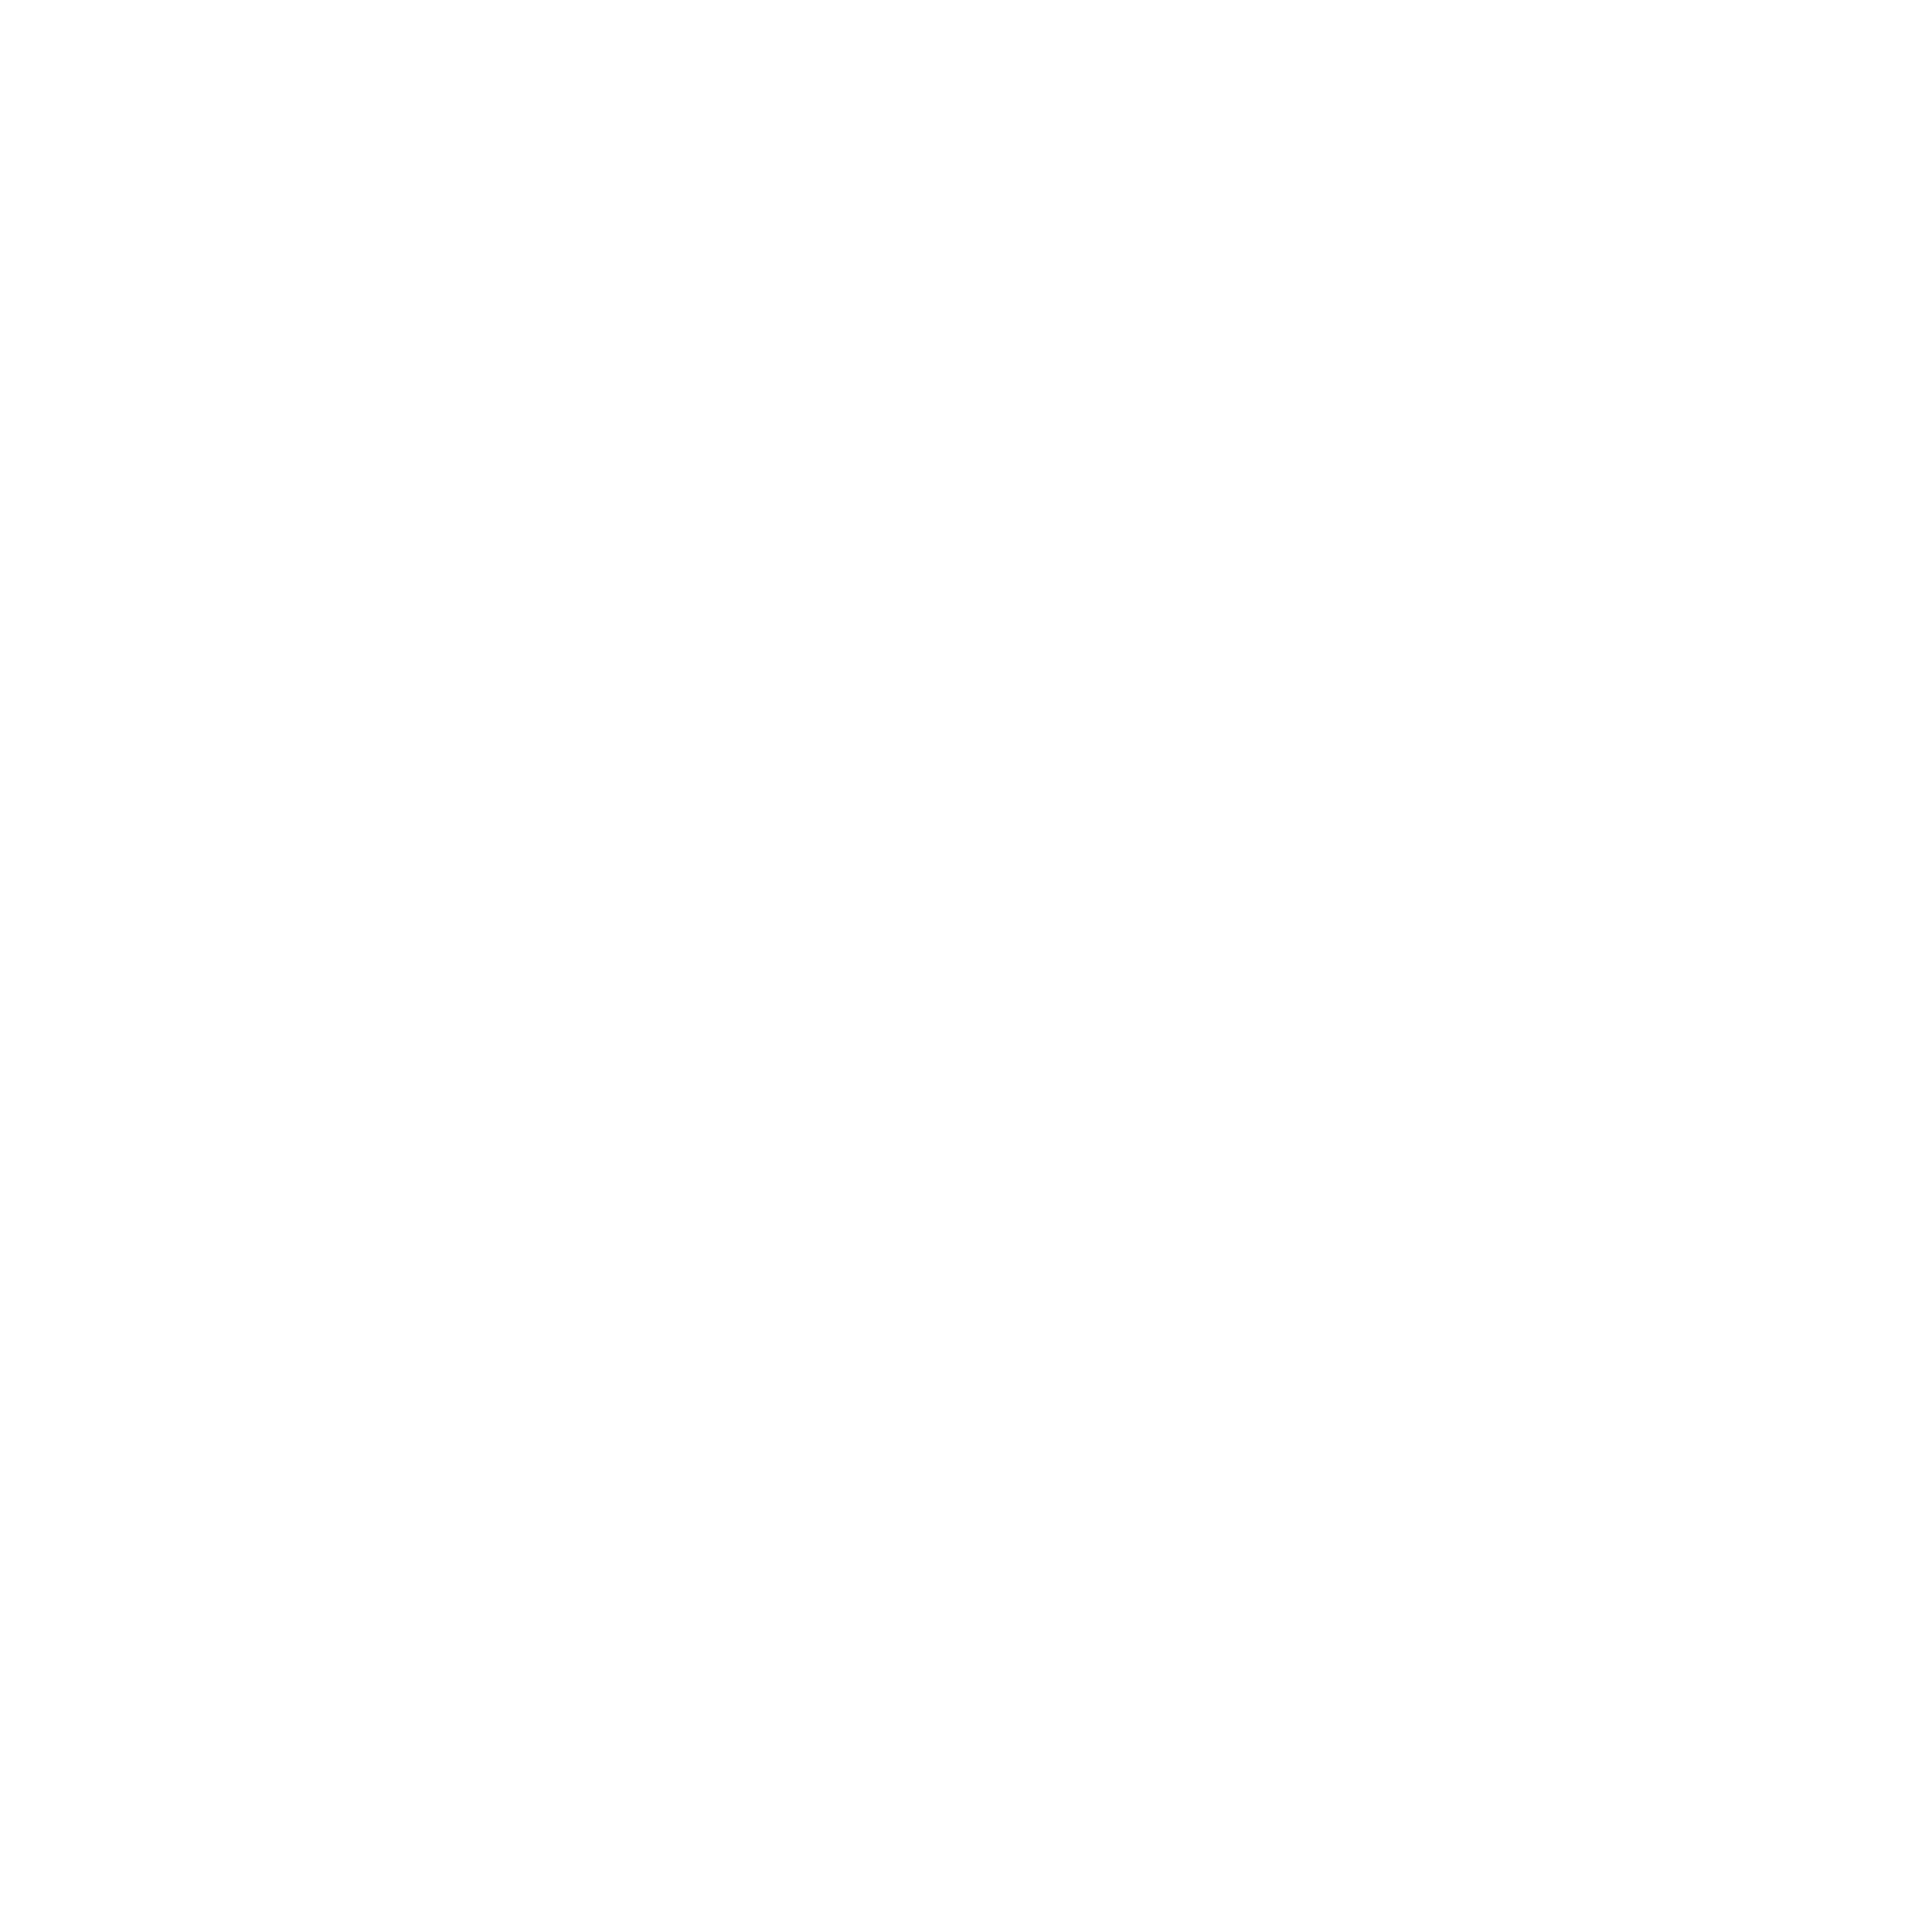 <strong>24/7 emergency hotline + ACL mobility service </strong><br>We are always there for you! Thanks to our 24/7 emergency hotline and our 24-hour mobility service, you can always be on the road with peace of mind.
